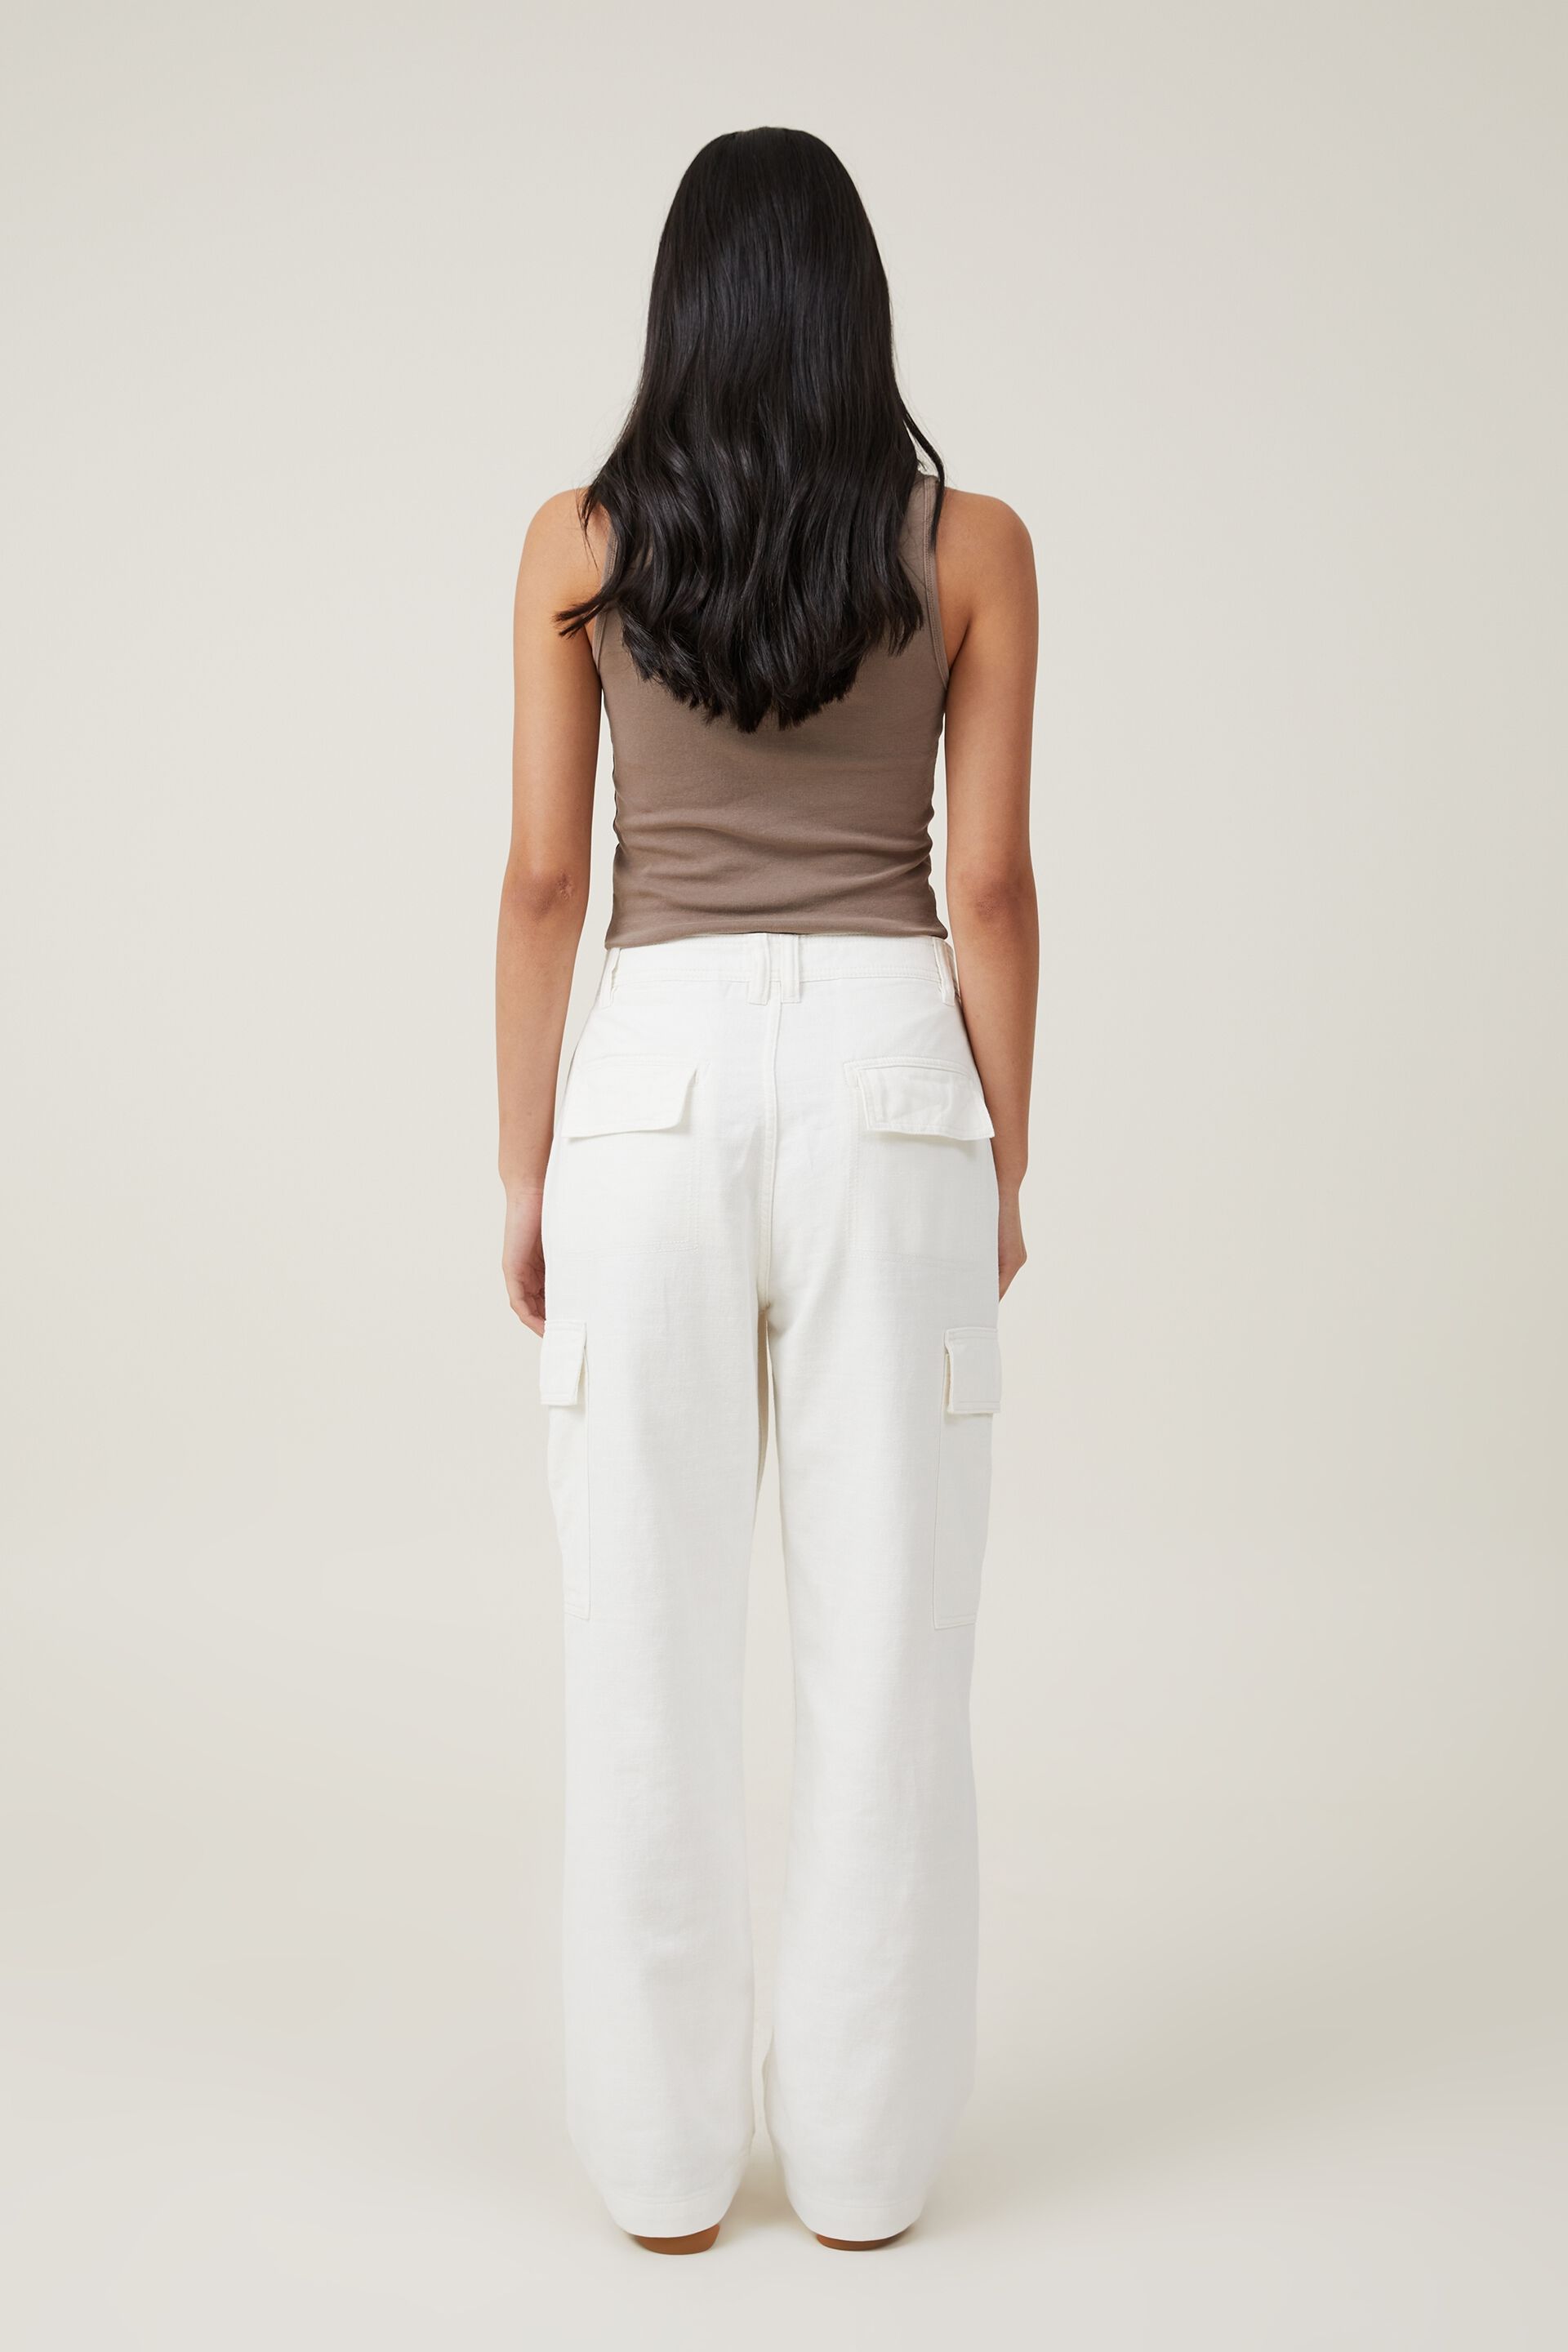 Buy White Trousers & Pants for Women by REMANIKA Online | Ajio.com